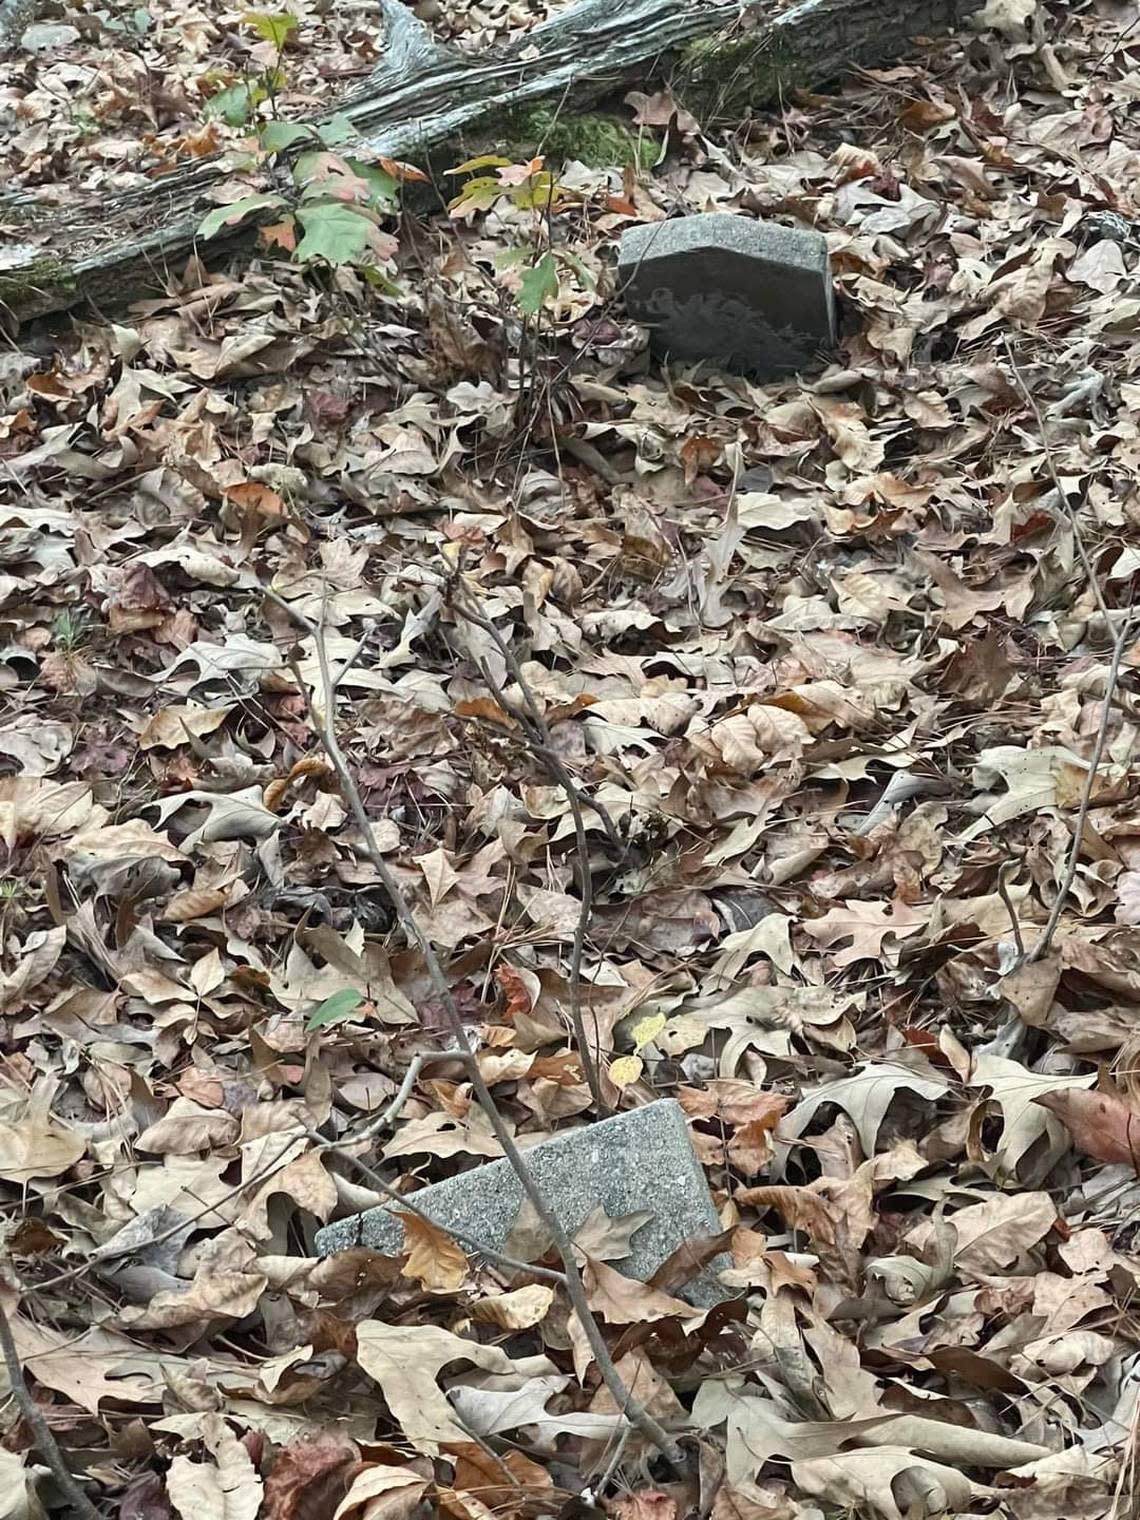 Headstones are covered in leaves at an overgrown and forgotten cemetery in Macon.